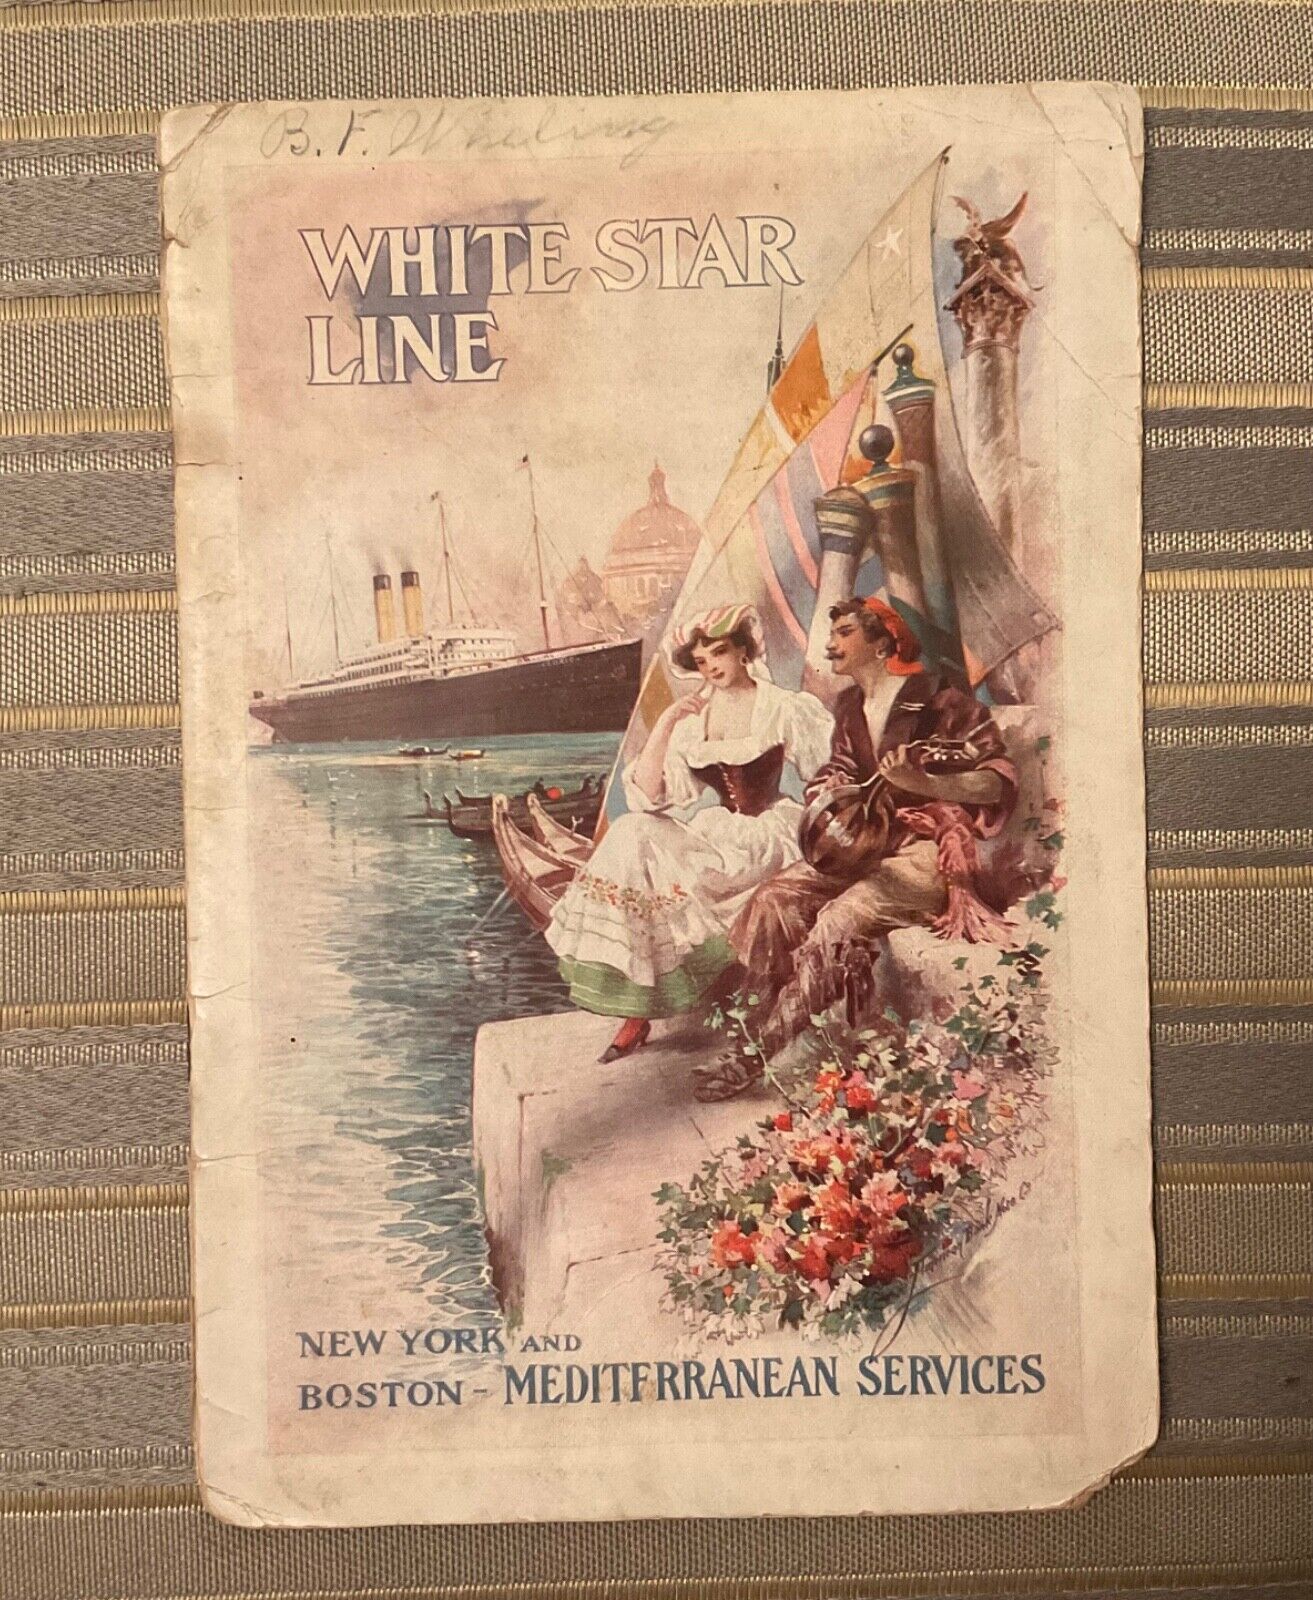 WHITE STAR LINE CANOPIC 1910 PASSENGER LIST EARLY REF OLYMPIC TITANIC “BUILDING”